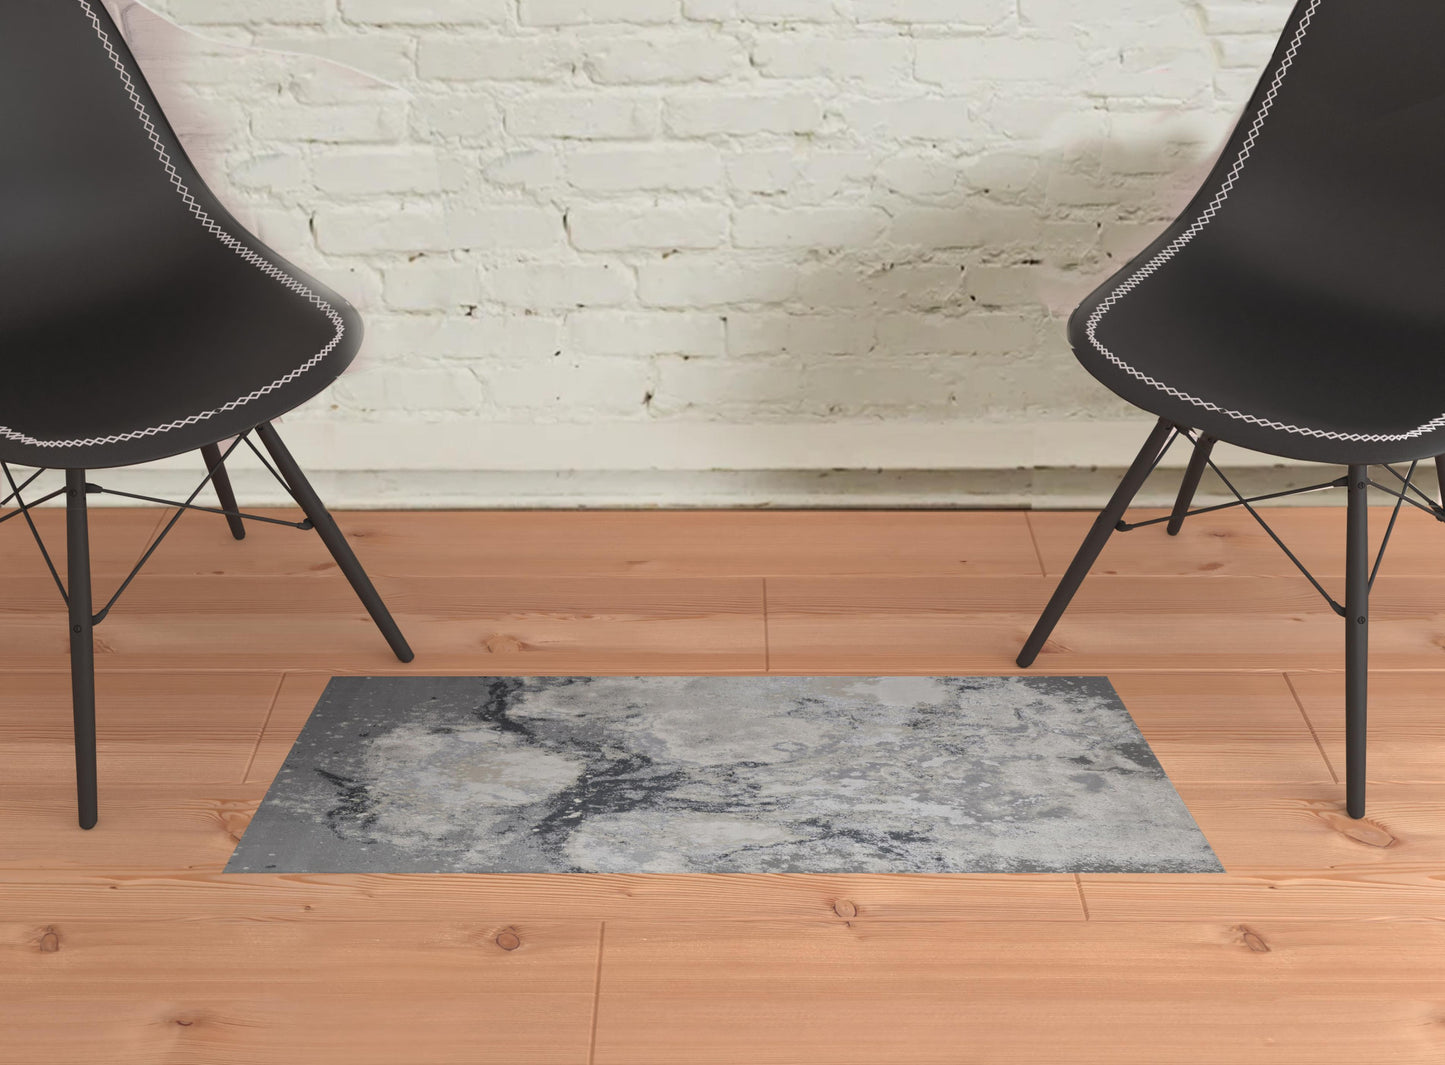 5' X 8' Ivory Gray And Black Abstract Power Loom Area Rug